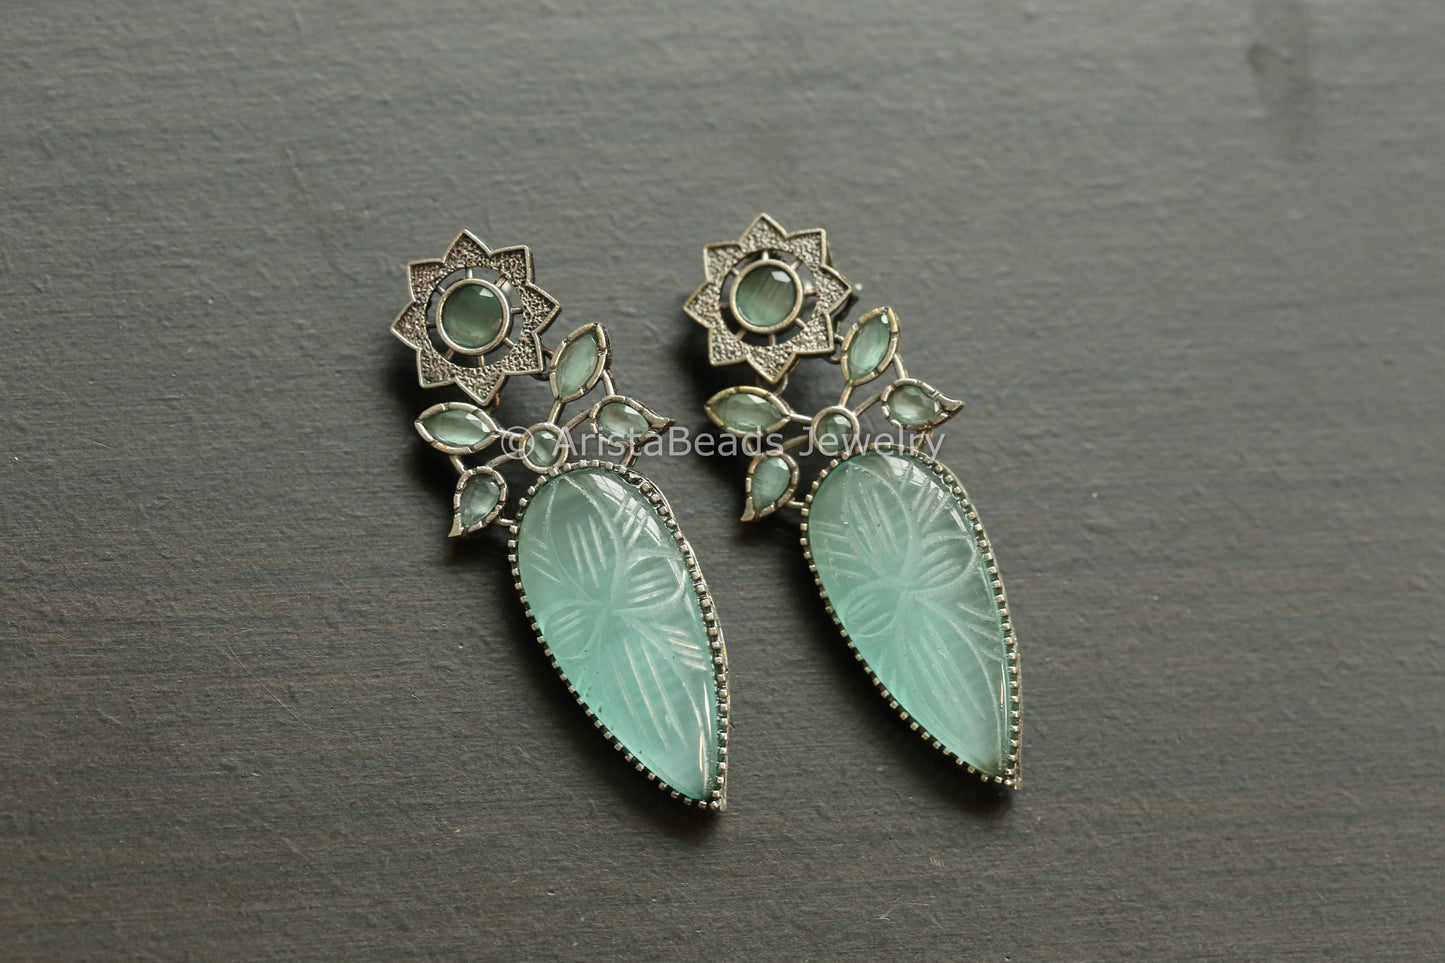 Large Oxidized Carved Stone Earrings - Mint